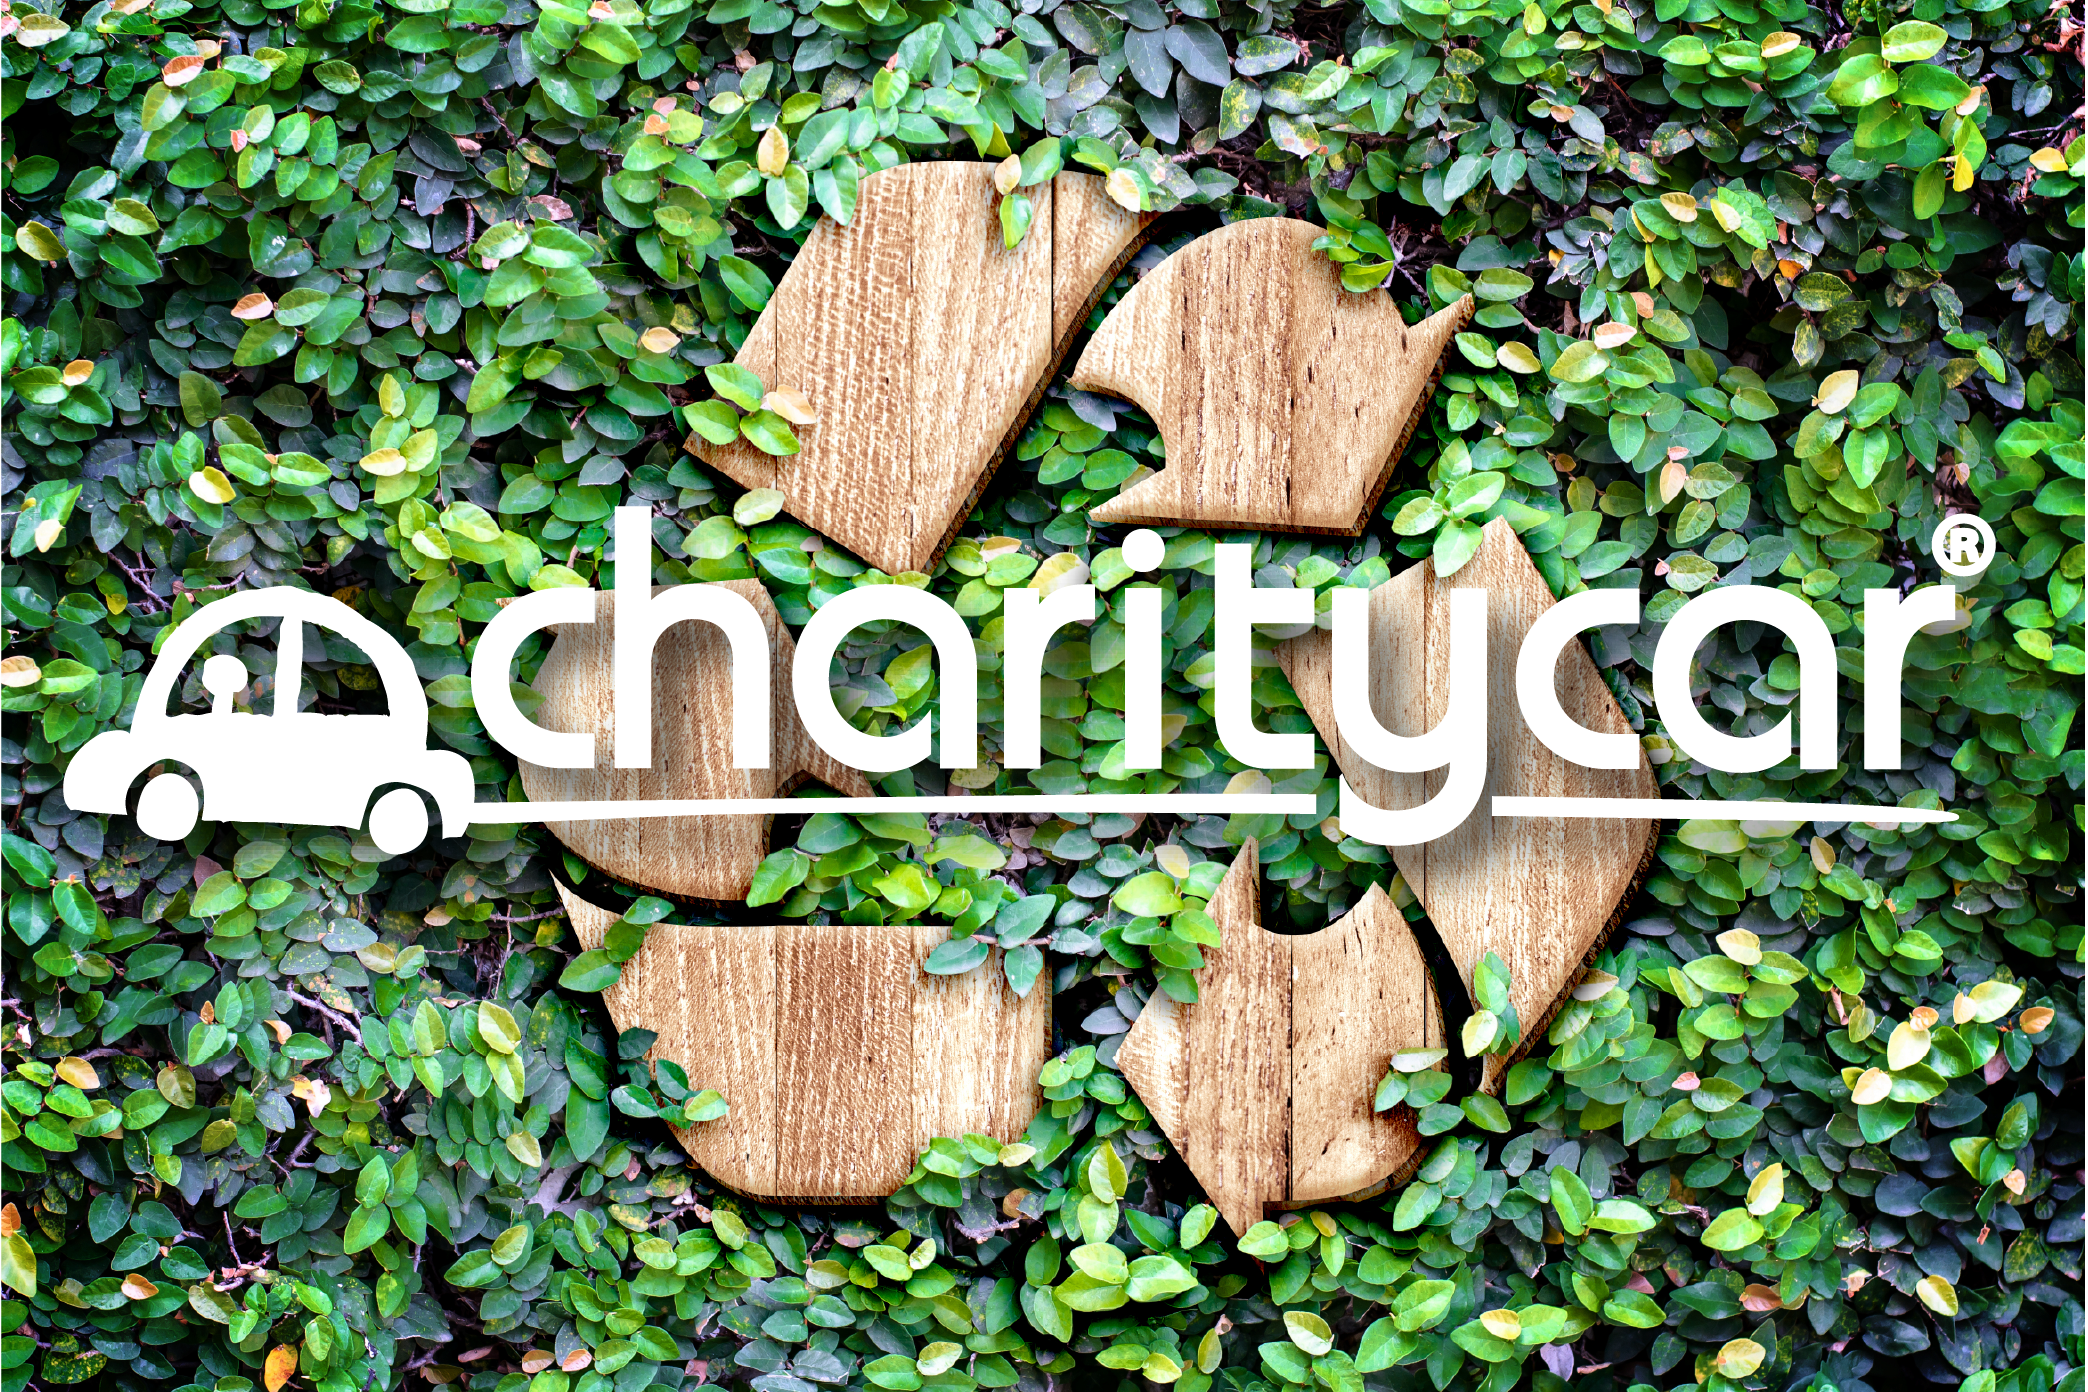 White Charity Car logo over background of leaves and a wooden recycling symbol